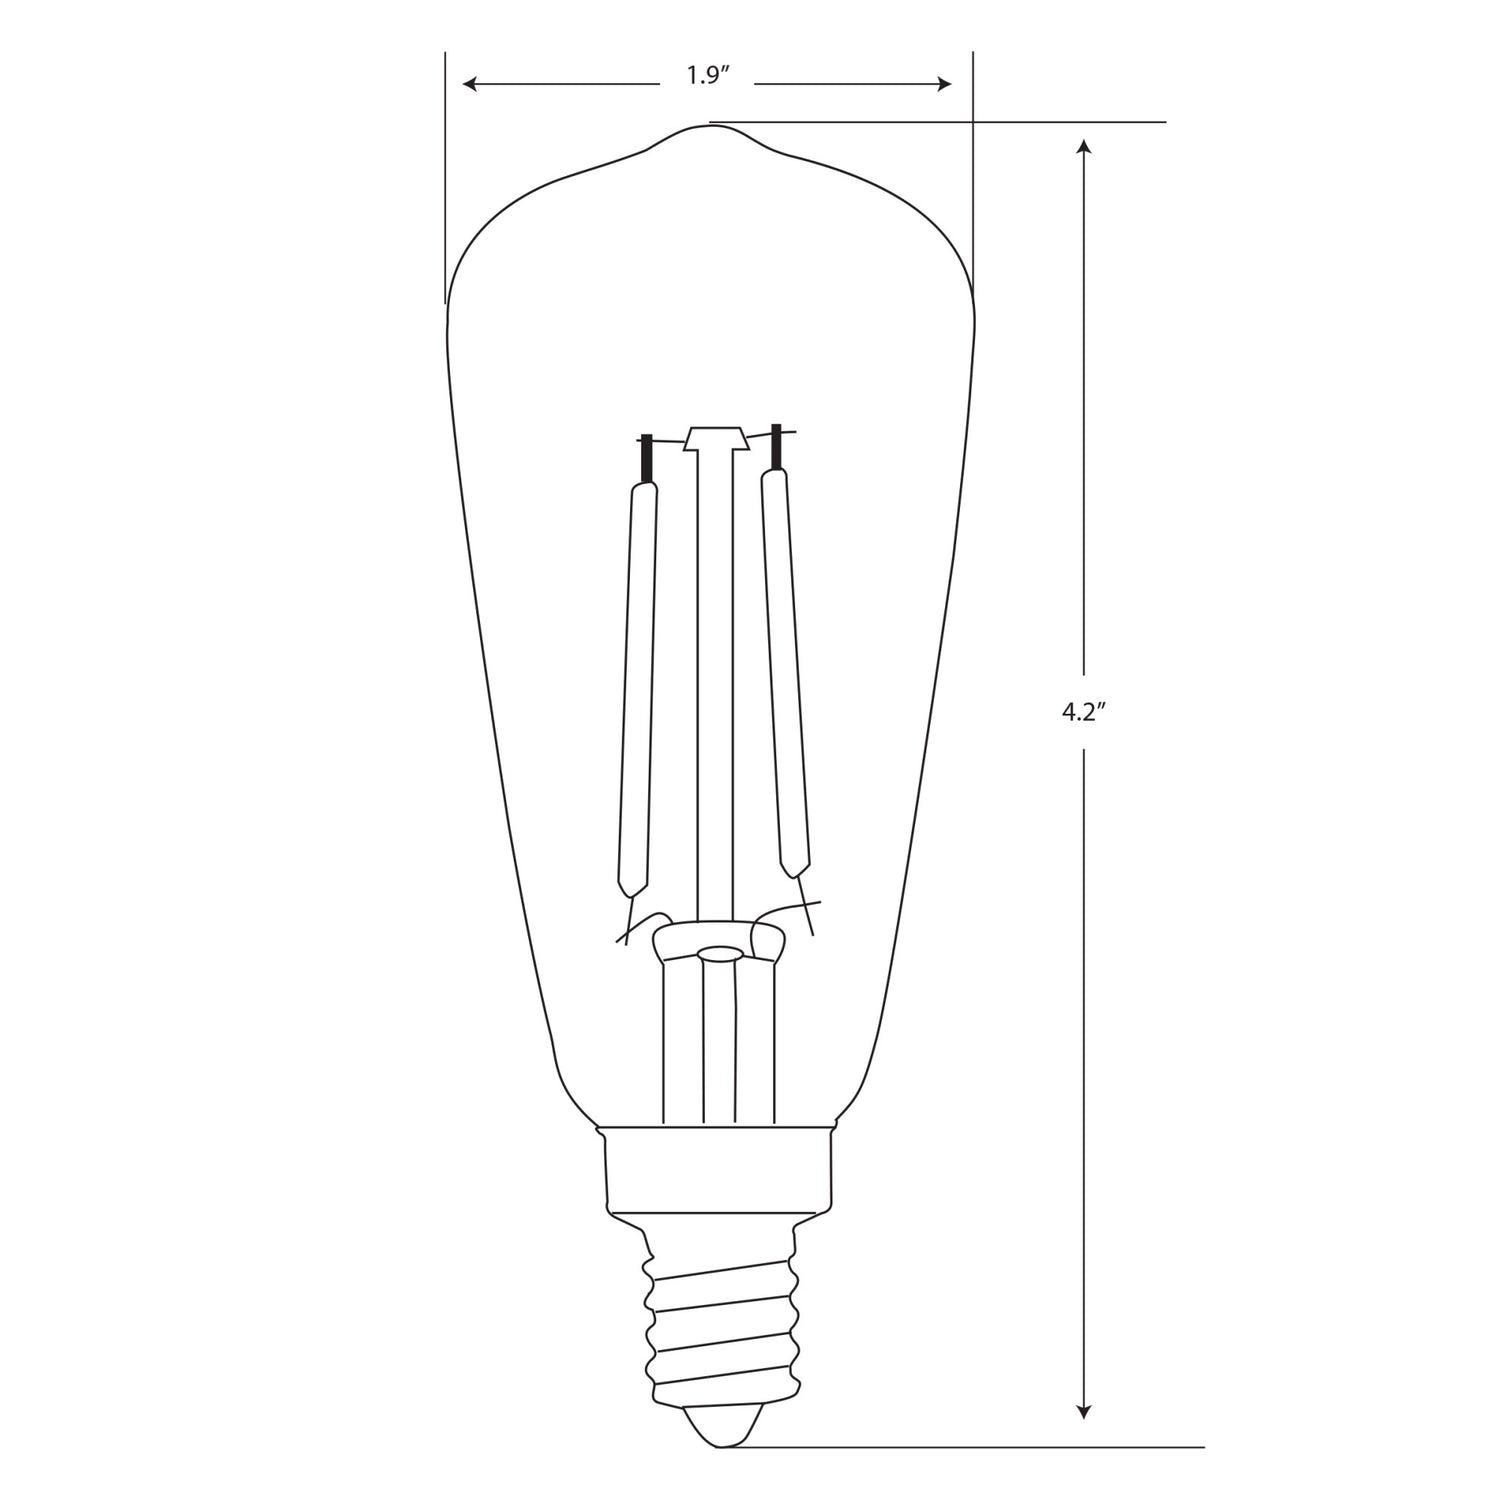 3.5W (25W Replacement) ST15C E12 Dimmable Straight Filament Amber Glass Vintage Edison LED Light Bulb, Soft White